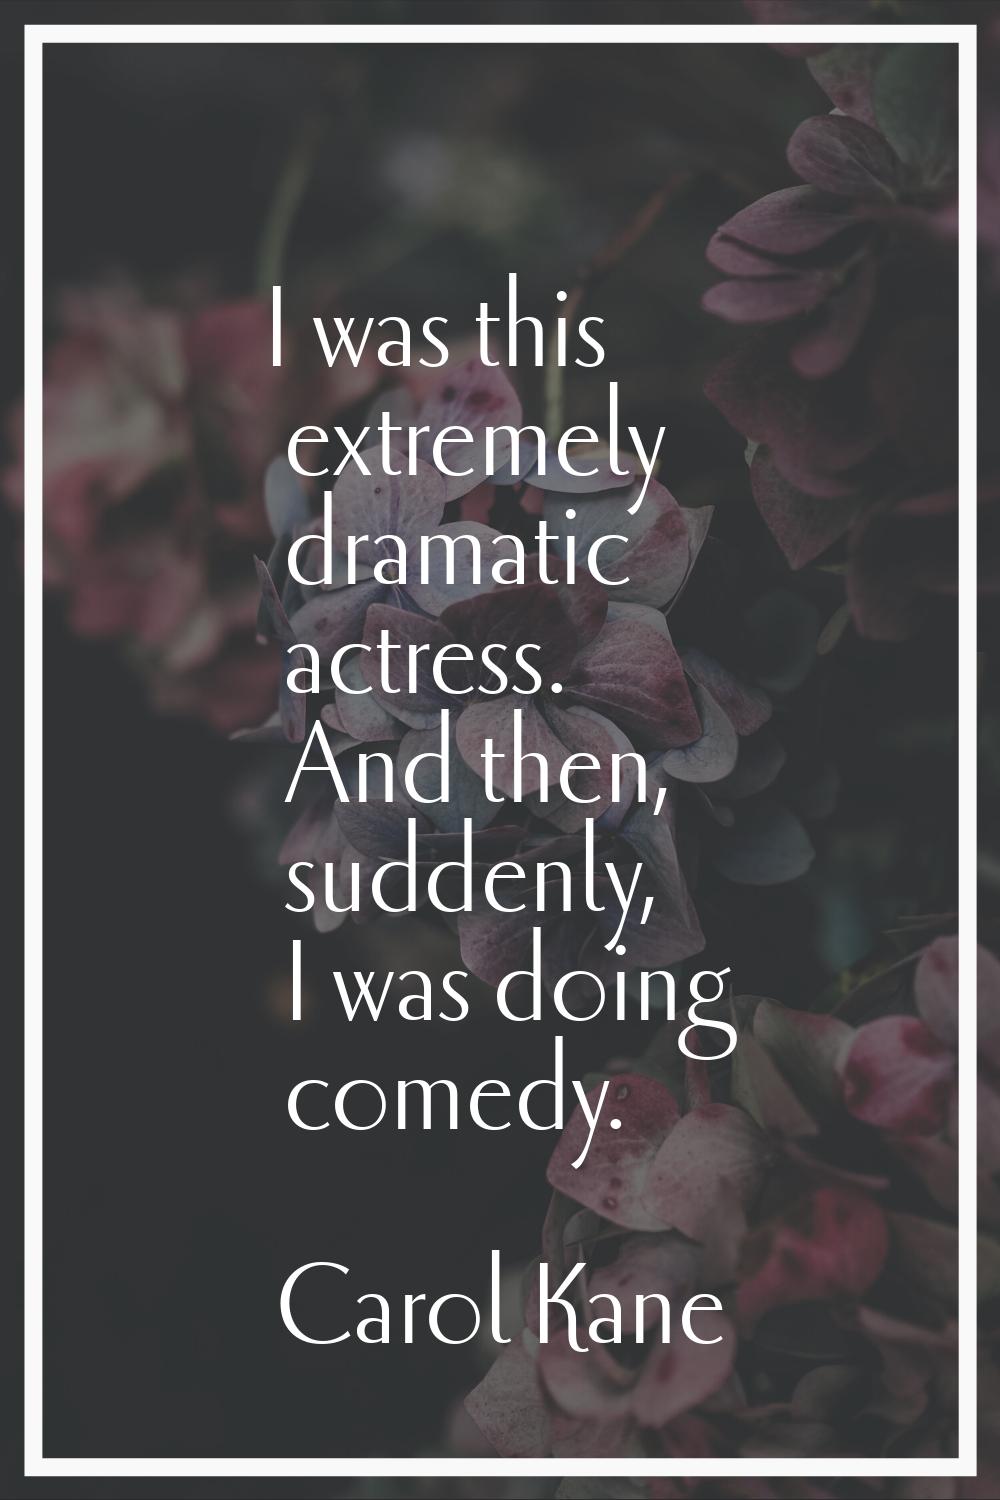 I was this extremely dramatic actress. And then, suddenly, I was doing comedy.